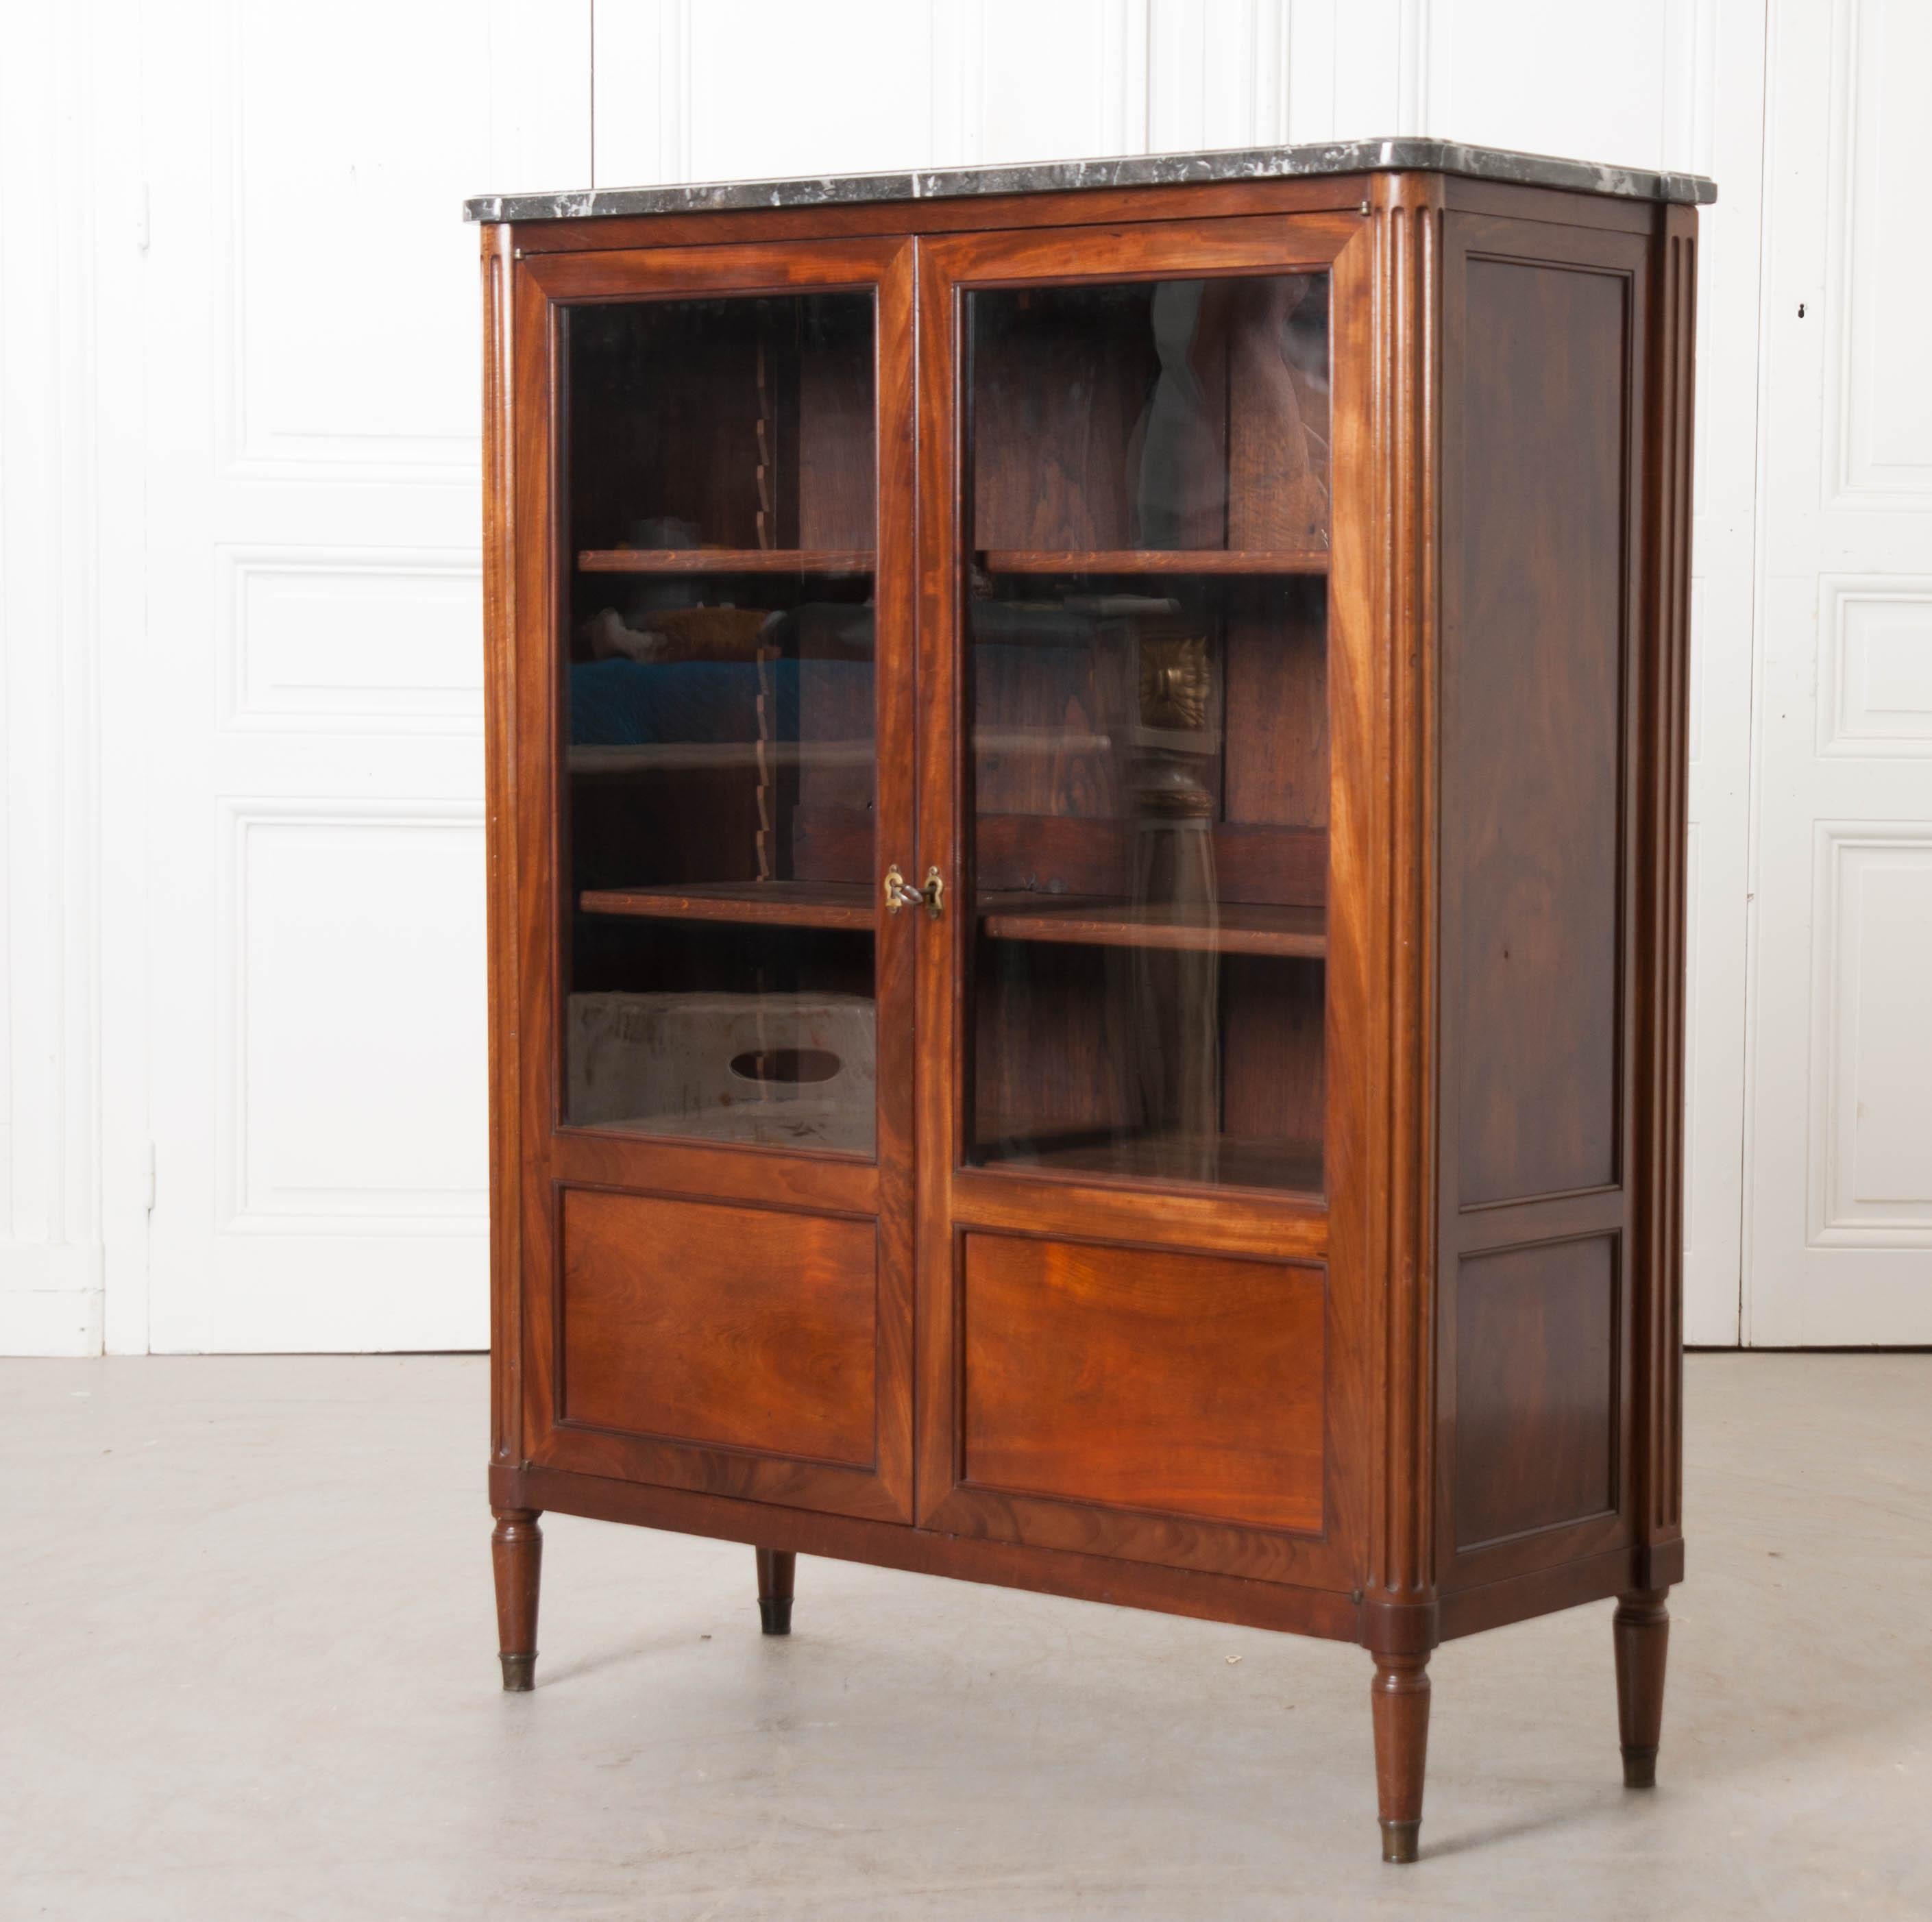 This diminutive Louis XVI-style vitrine, or bookcase, circa 1840s, was found in France and features a charcoal marble top with white veining over a pair of partially glazed and paneled doors, fluted turret corners, and raised on toupie feet. This